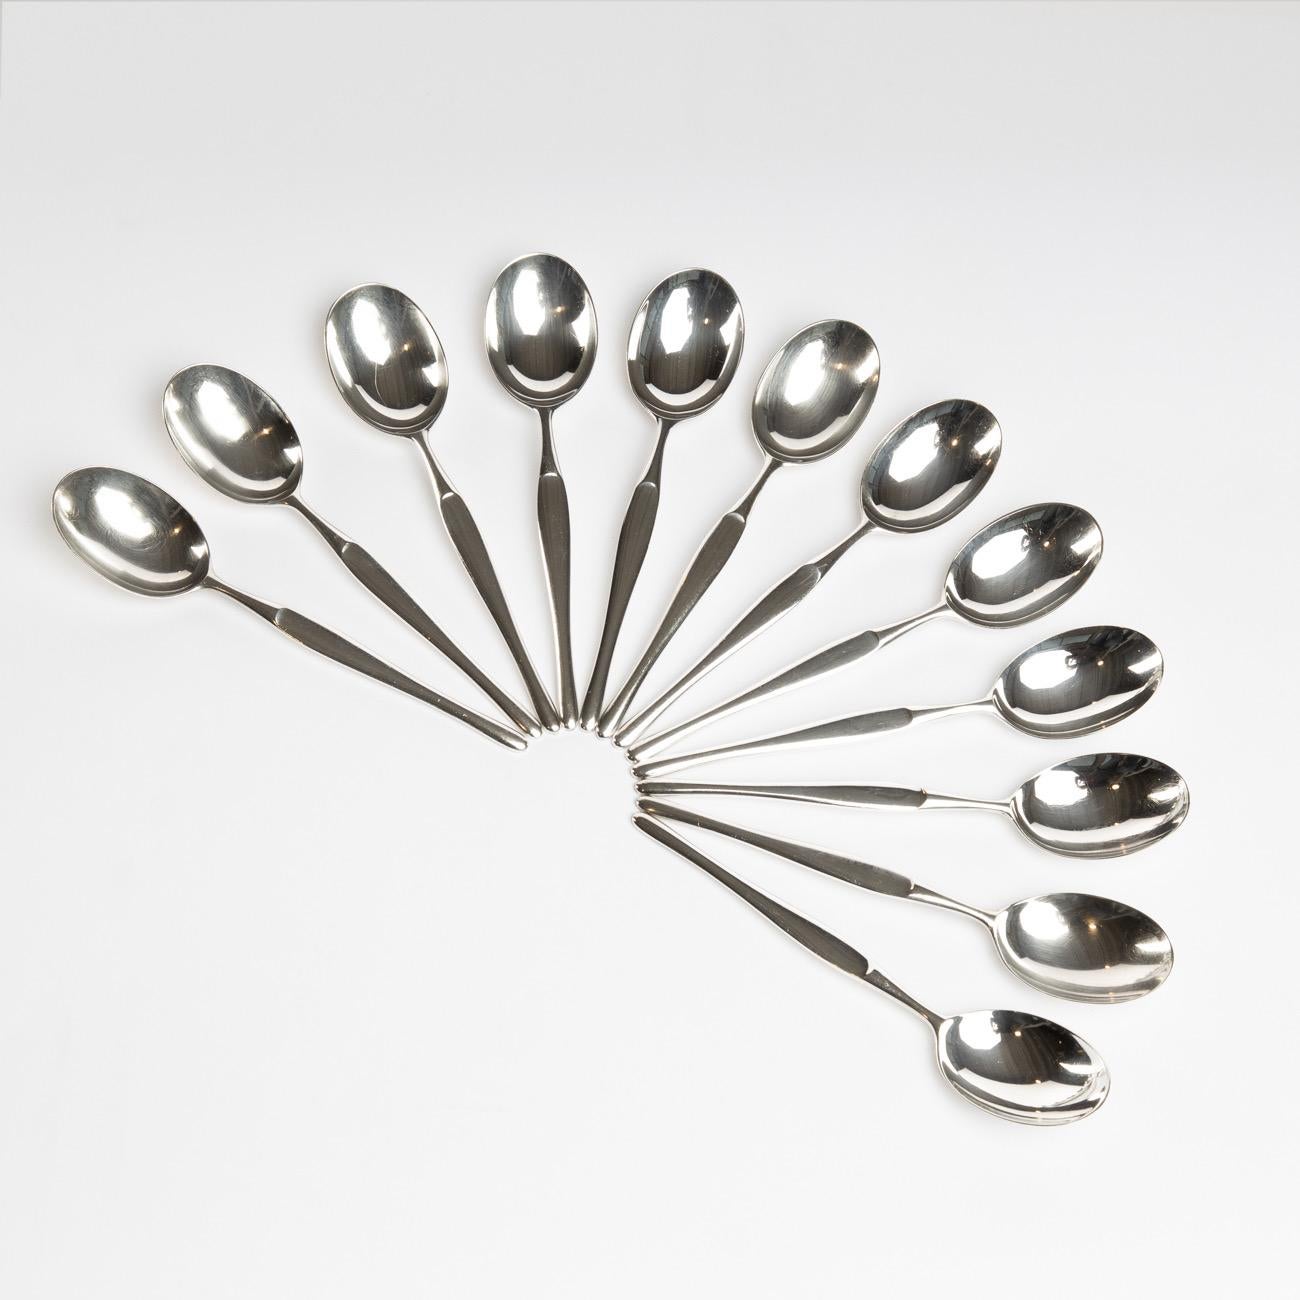 Designed in 1957 by Tapio Wirkkala, the “Duo” flatware set is made of silver plated metal. It is part of the “Formes Nouvelles” (“New Shapes”) range imagined by the well-known Parisian silversmith Christofle.

The flatware set consists of 121